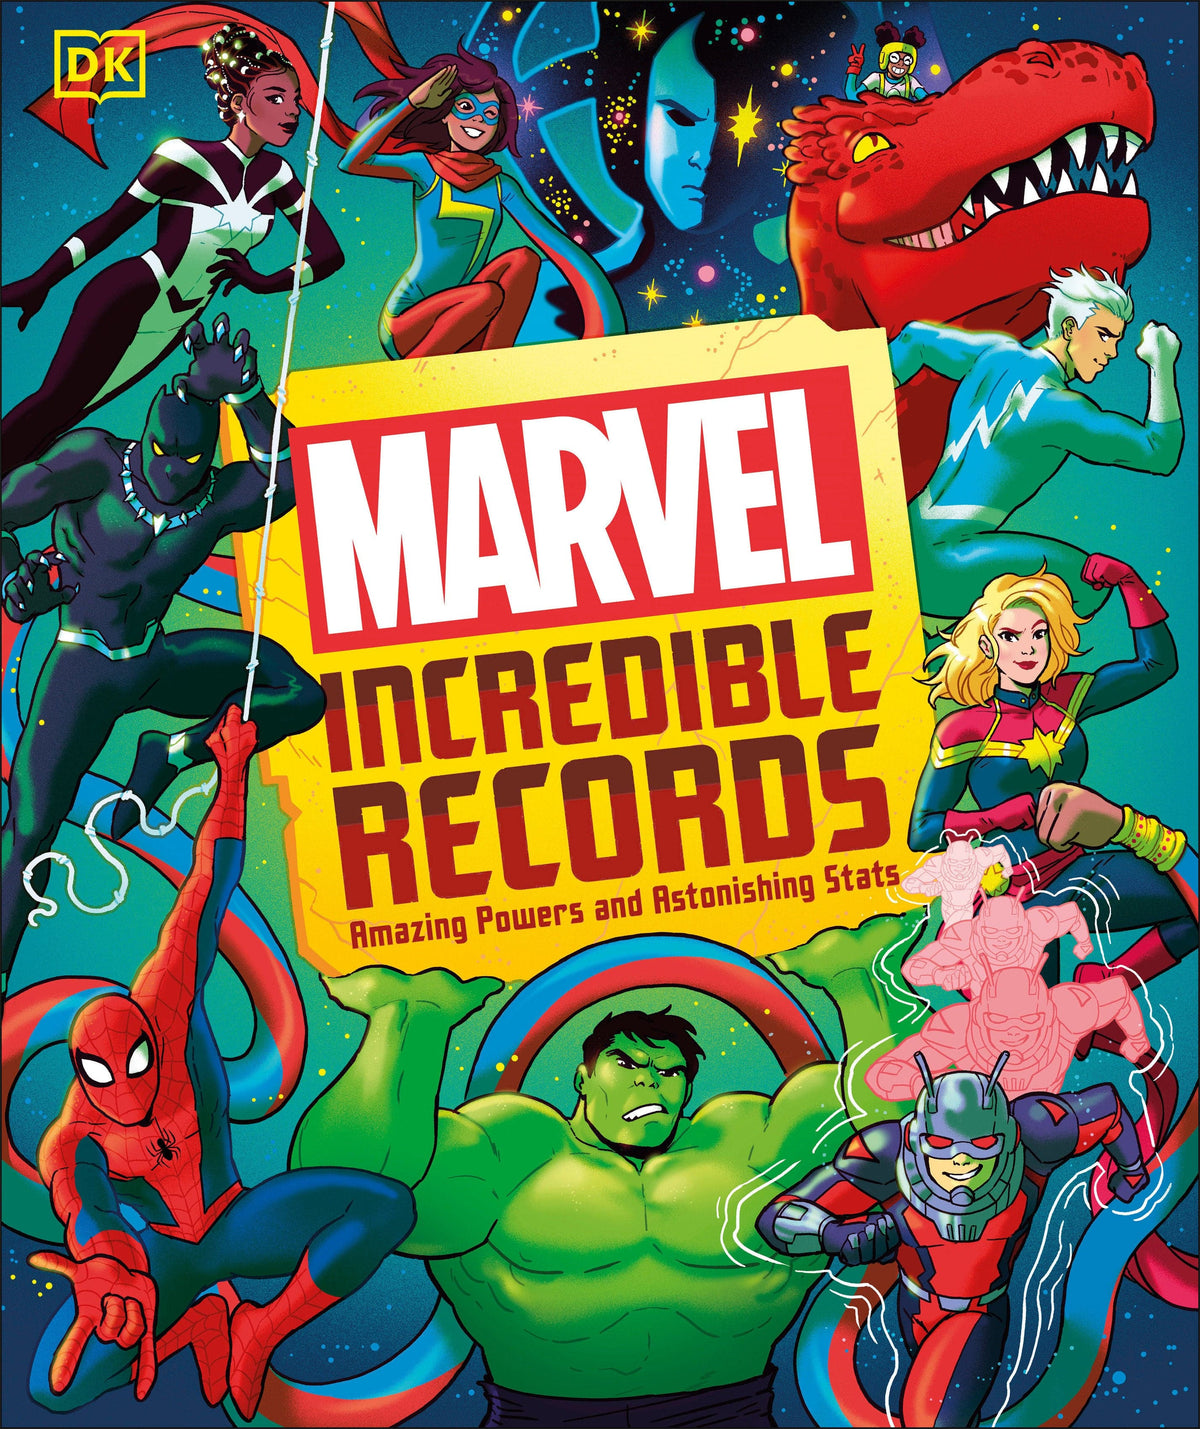 Marvel Incredible Records Hardcover